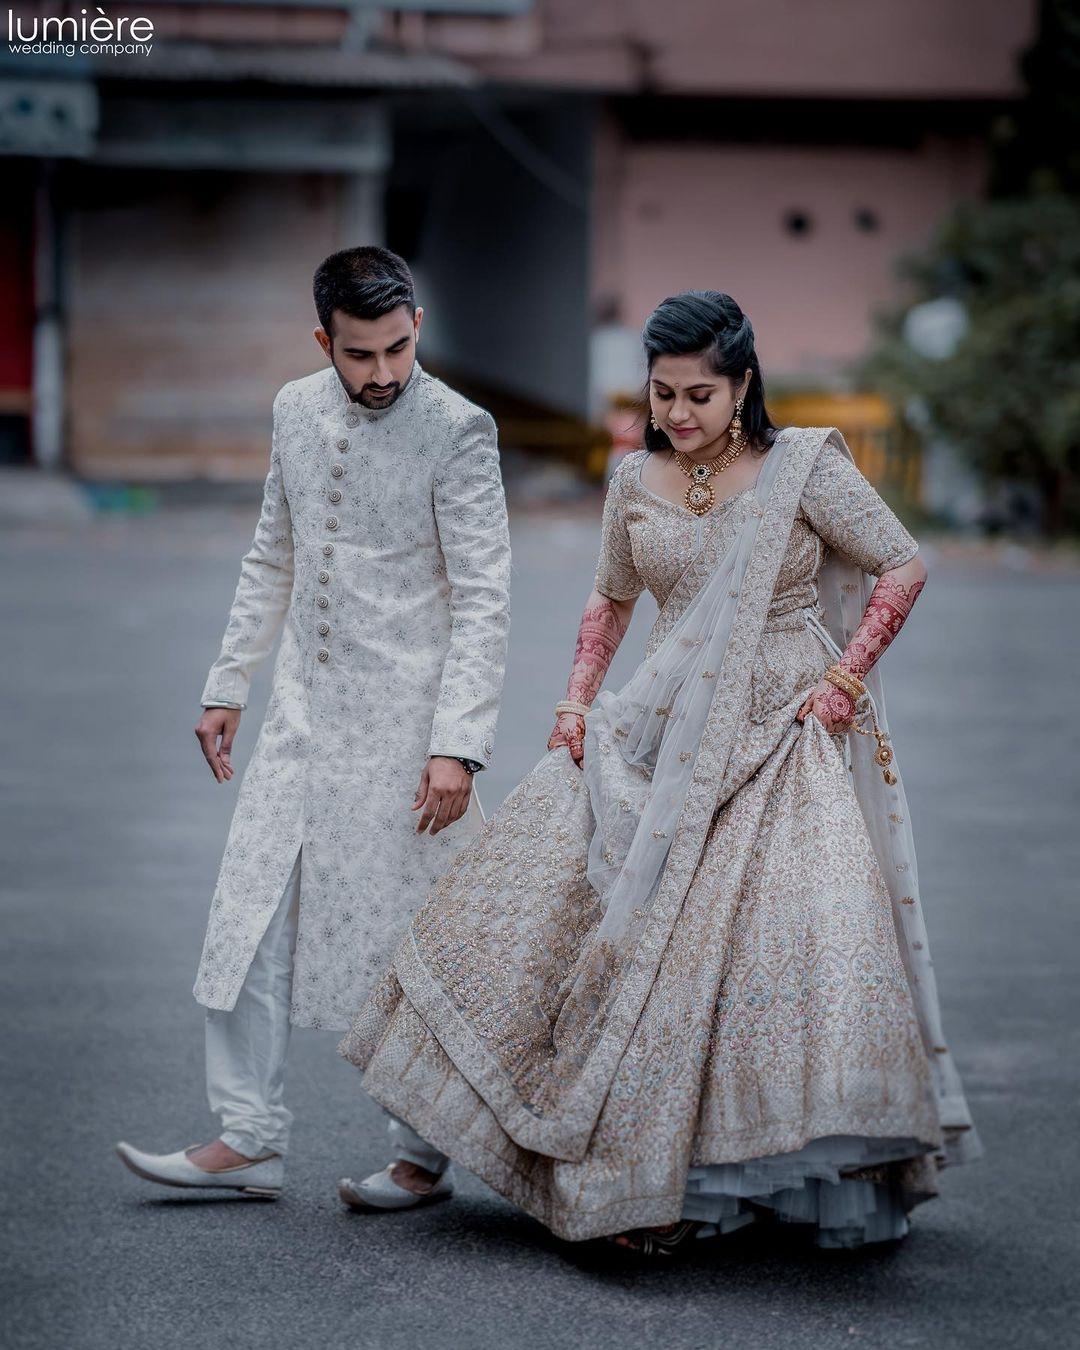 2020's Best Coordinated Wedding Outfits - Couples That Set Goals For Matching  Outfits ! - Witty Vows | Wedding matching outfits, Indian wedding outfits,  Groom dress men